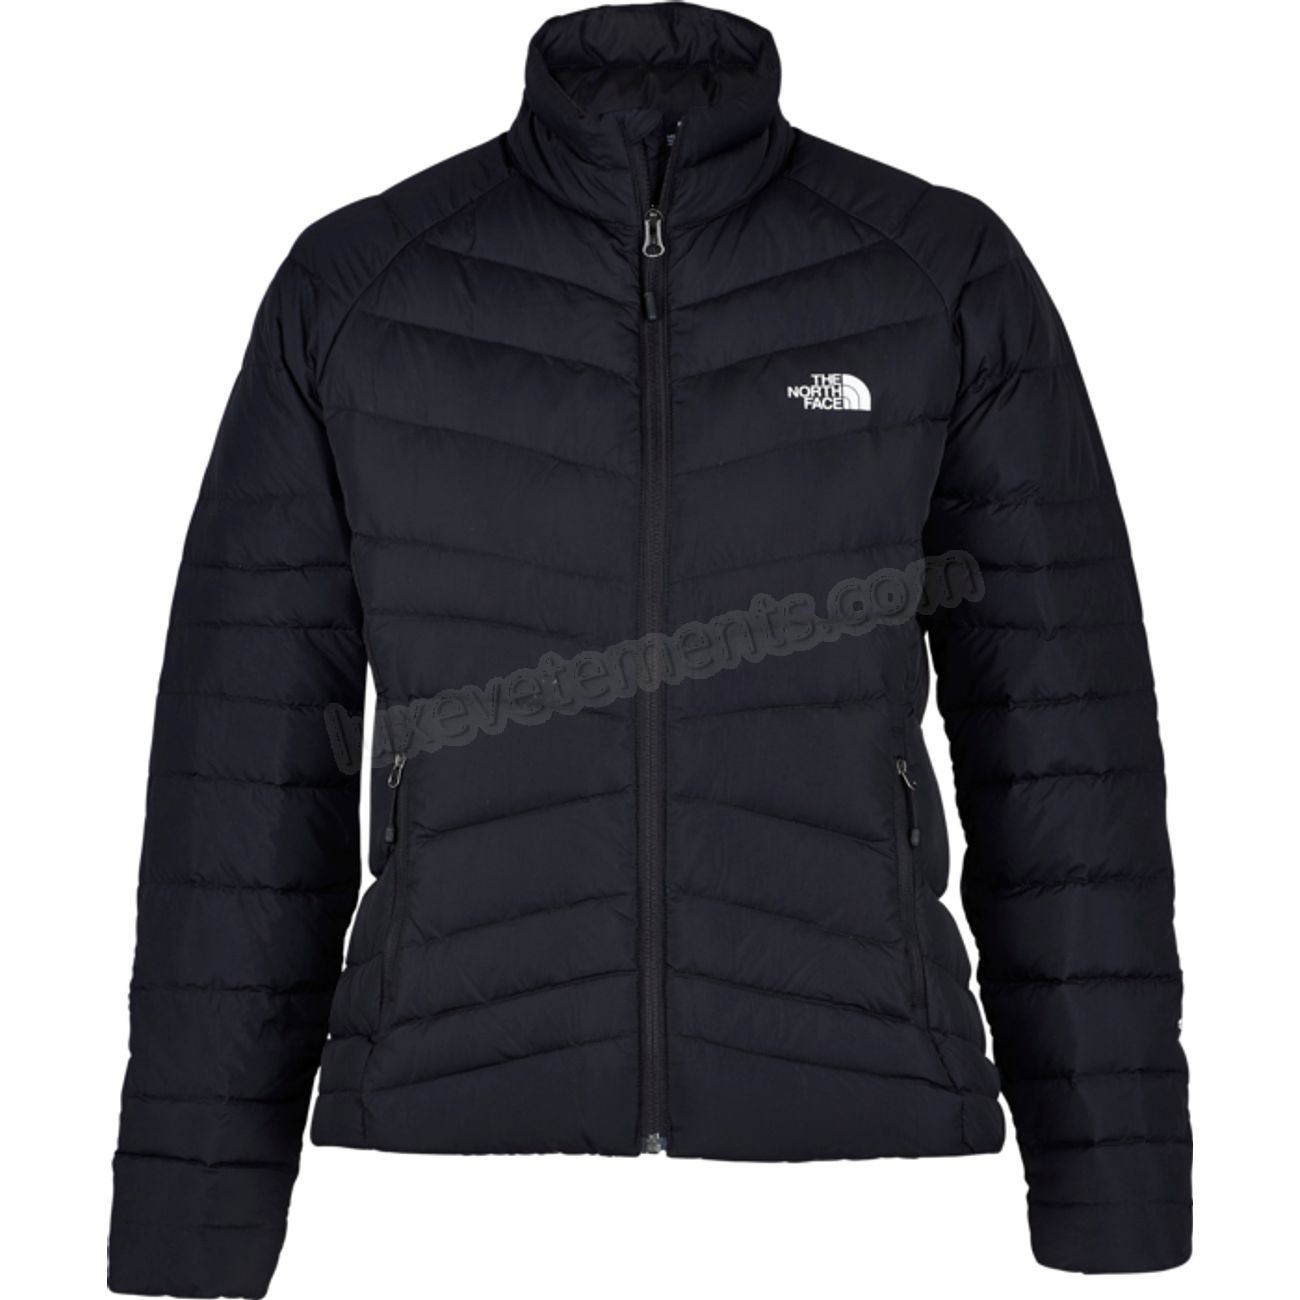 The North Face-VESTE femme THE NORTH FACE COMBAL DOWN Vente en ligne - The North Face-VESTE femme THE NORTH FACE COMBAL DOWN Vente en ligne